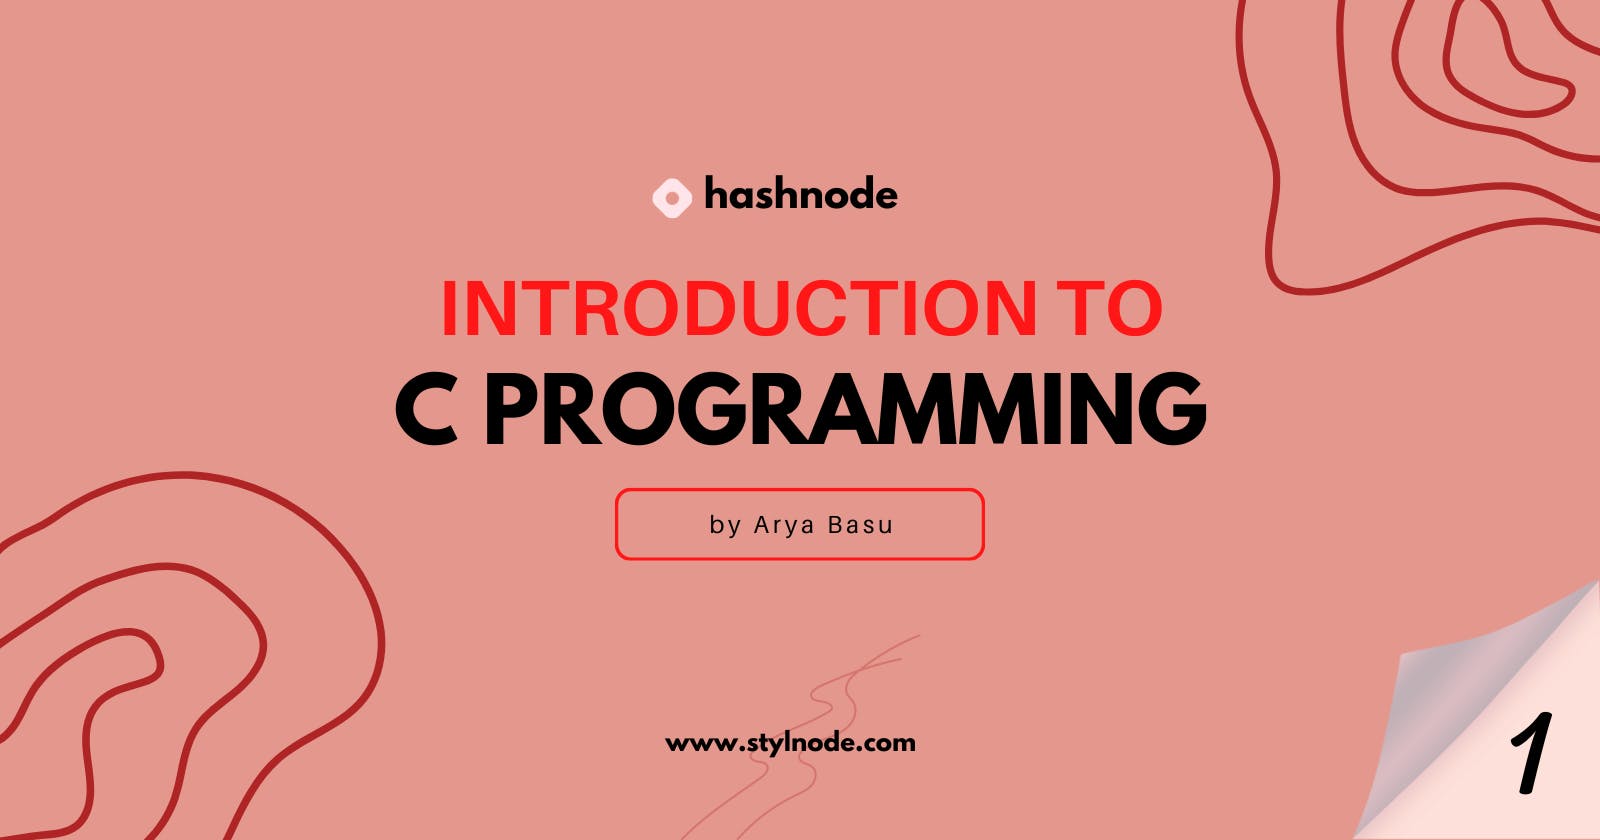 Day 01: Introduction to C Programming